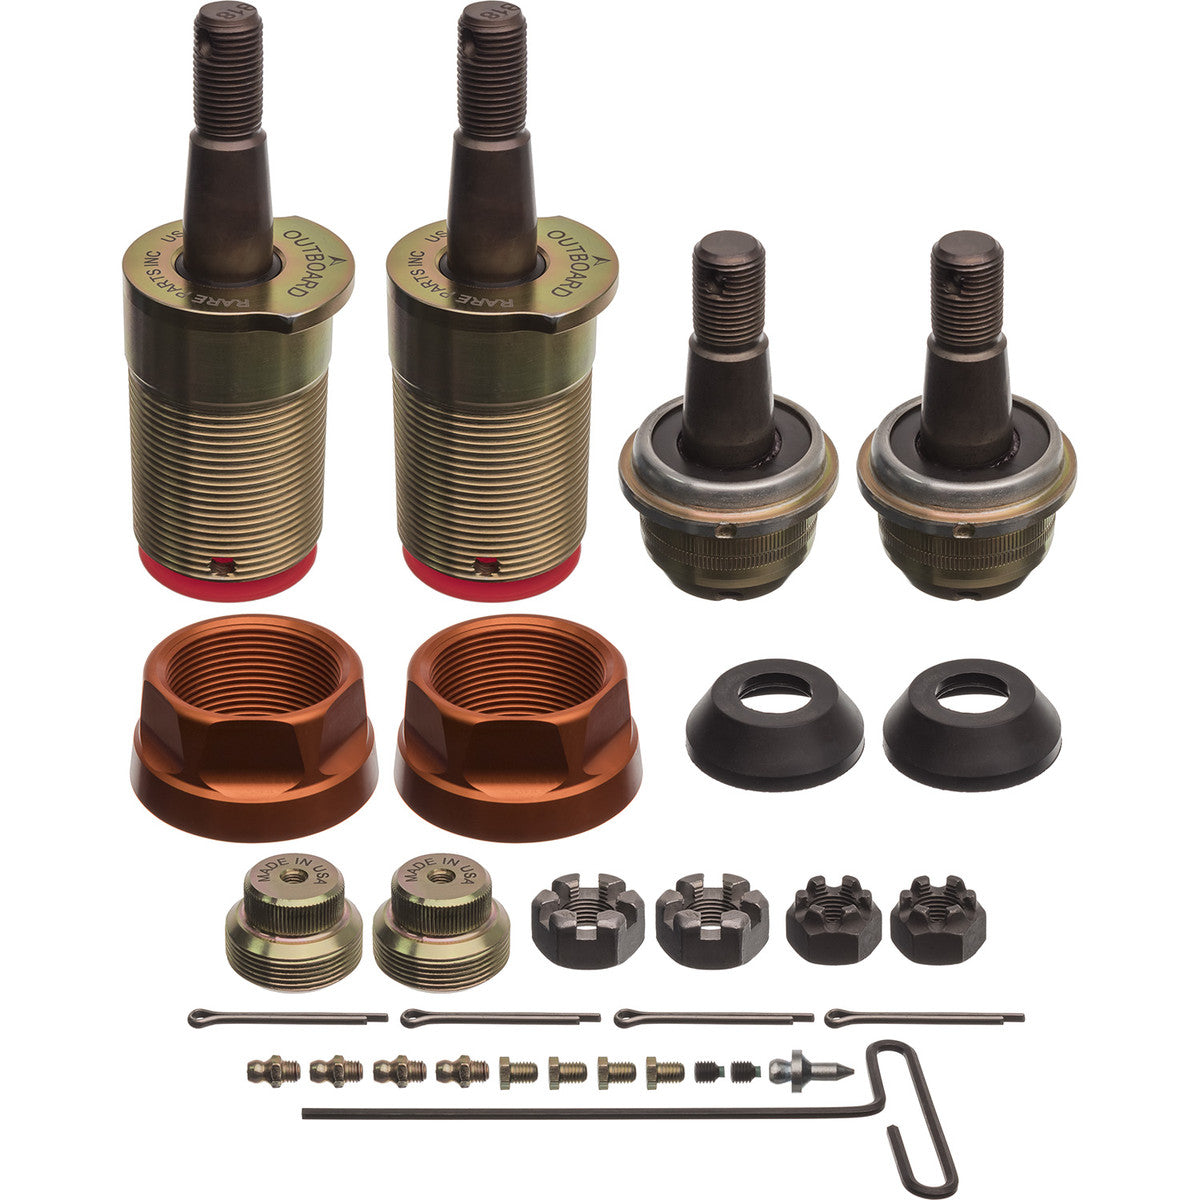 DUAL LOAD CARRYING BALL JOINT KIT - OVERSIZED (JK)